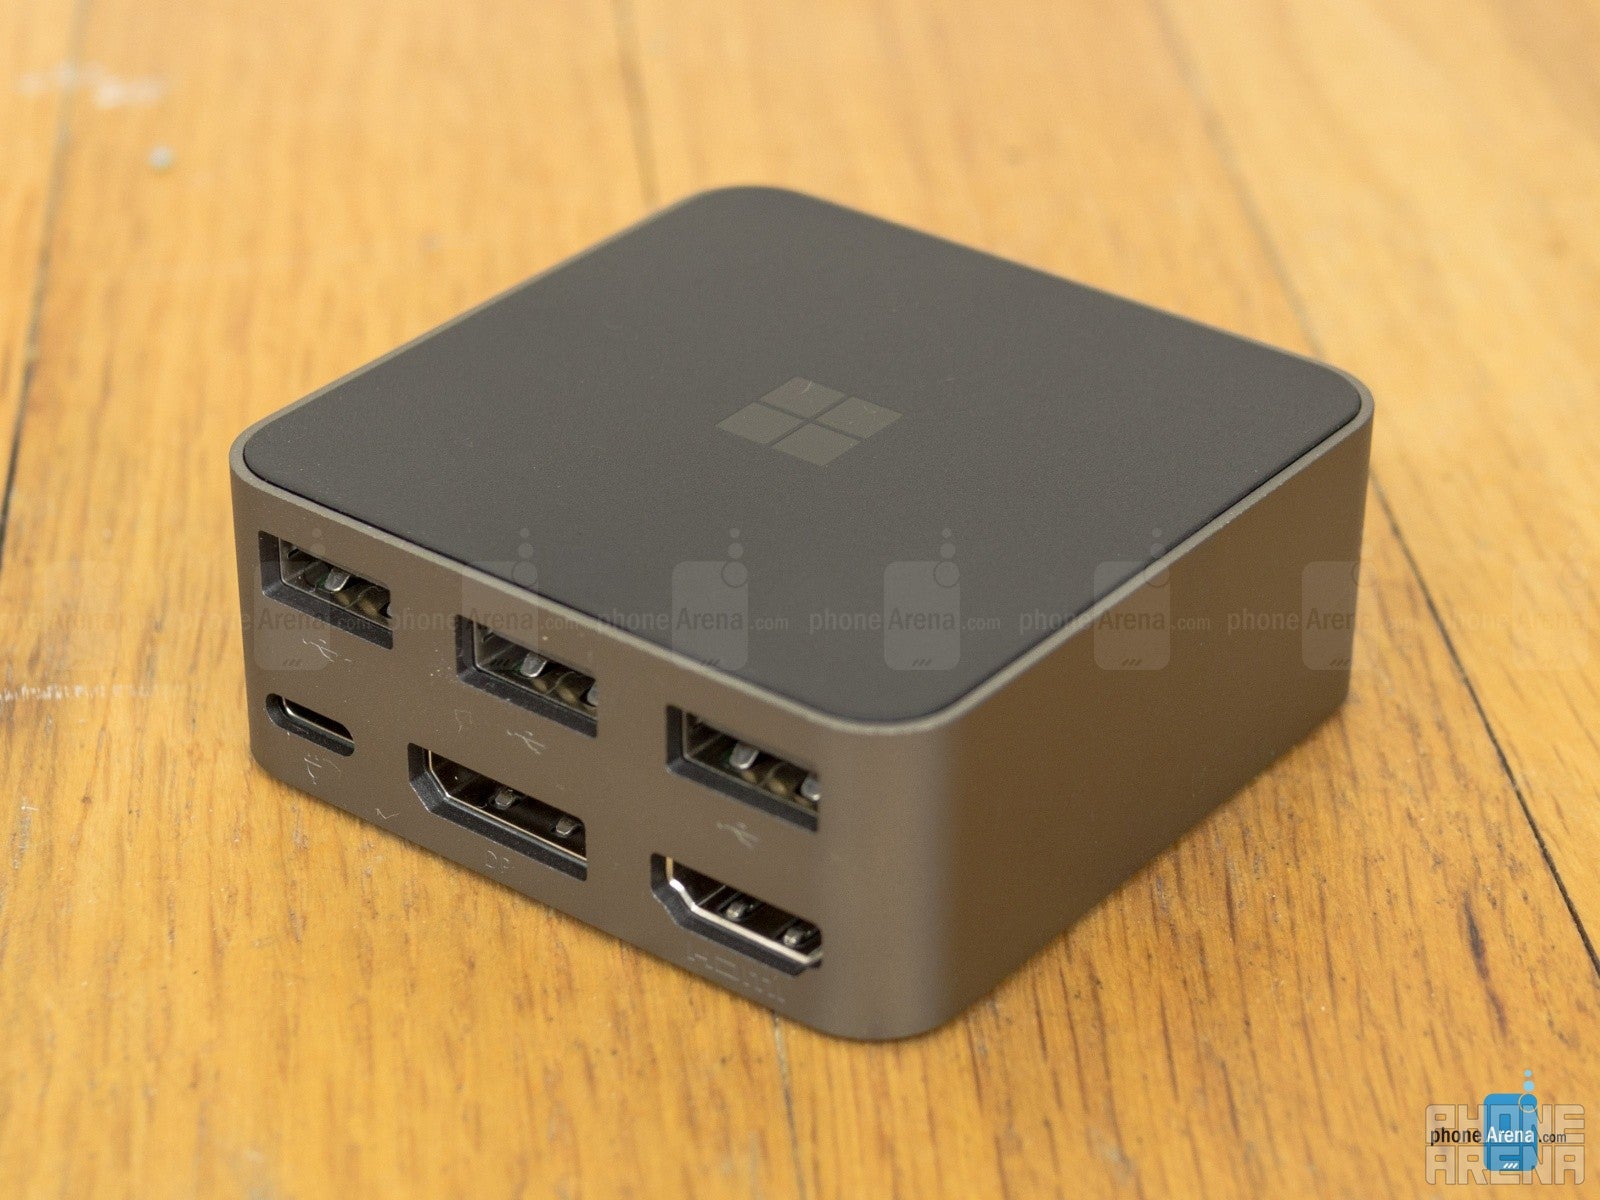 The Display Dock accessory - Microsoft Lumia 950 Review